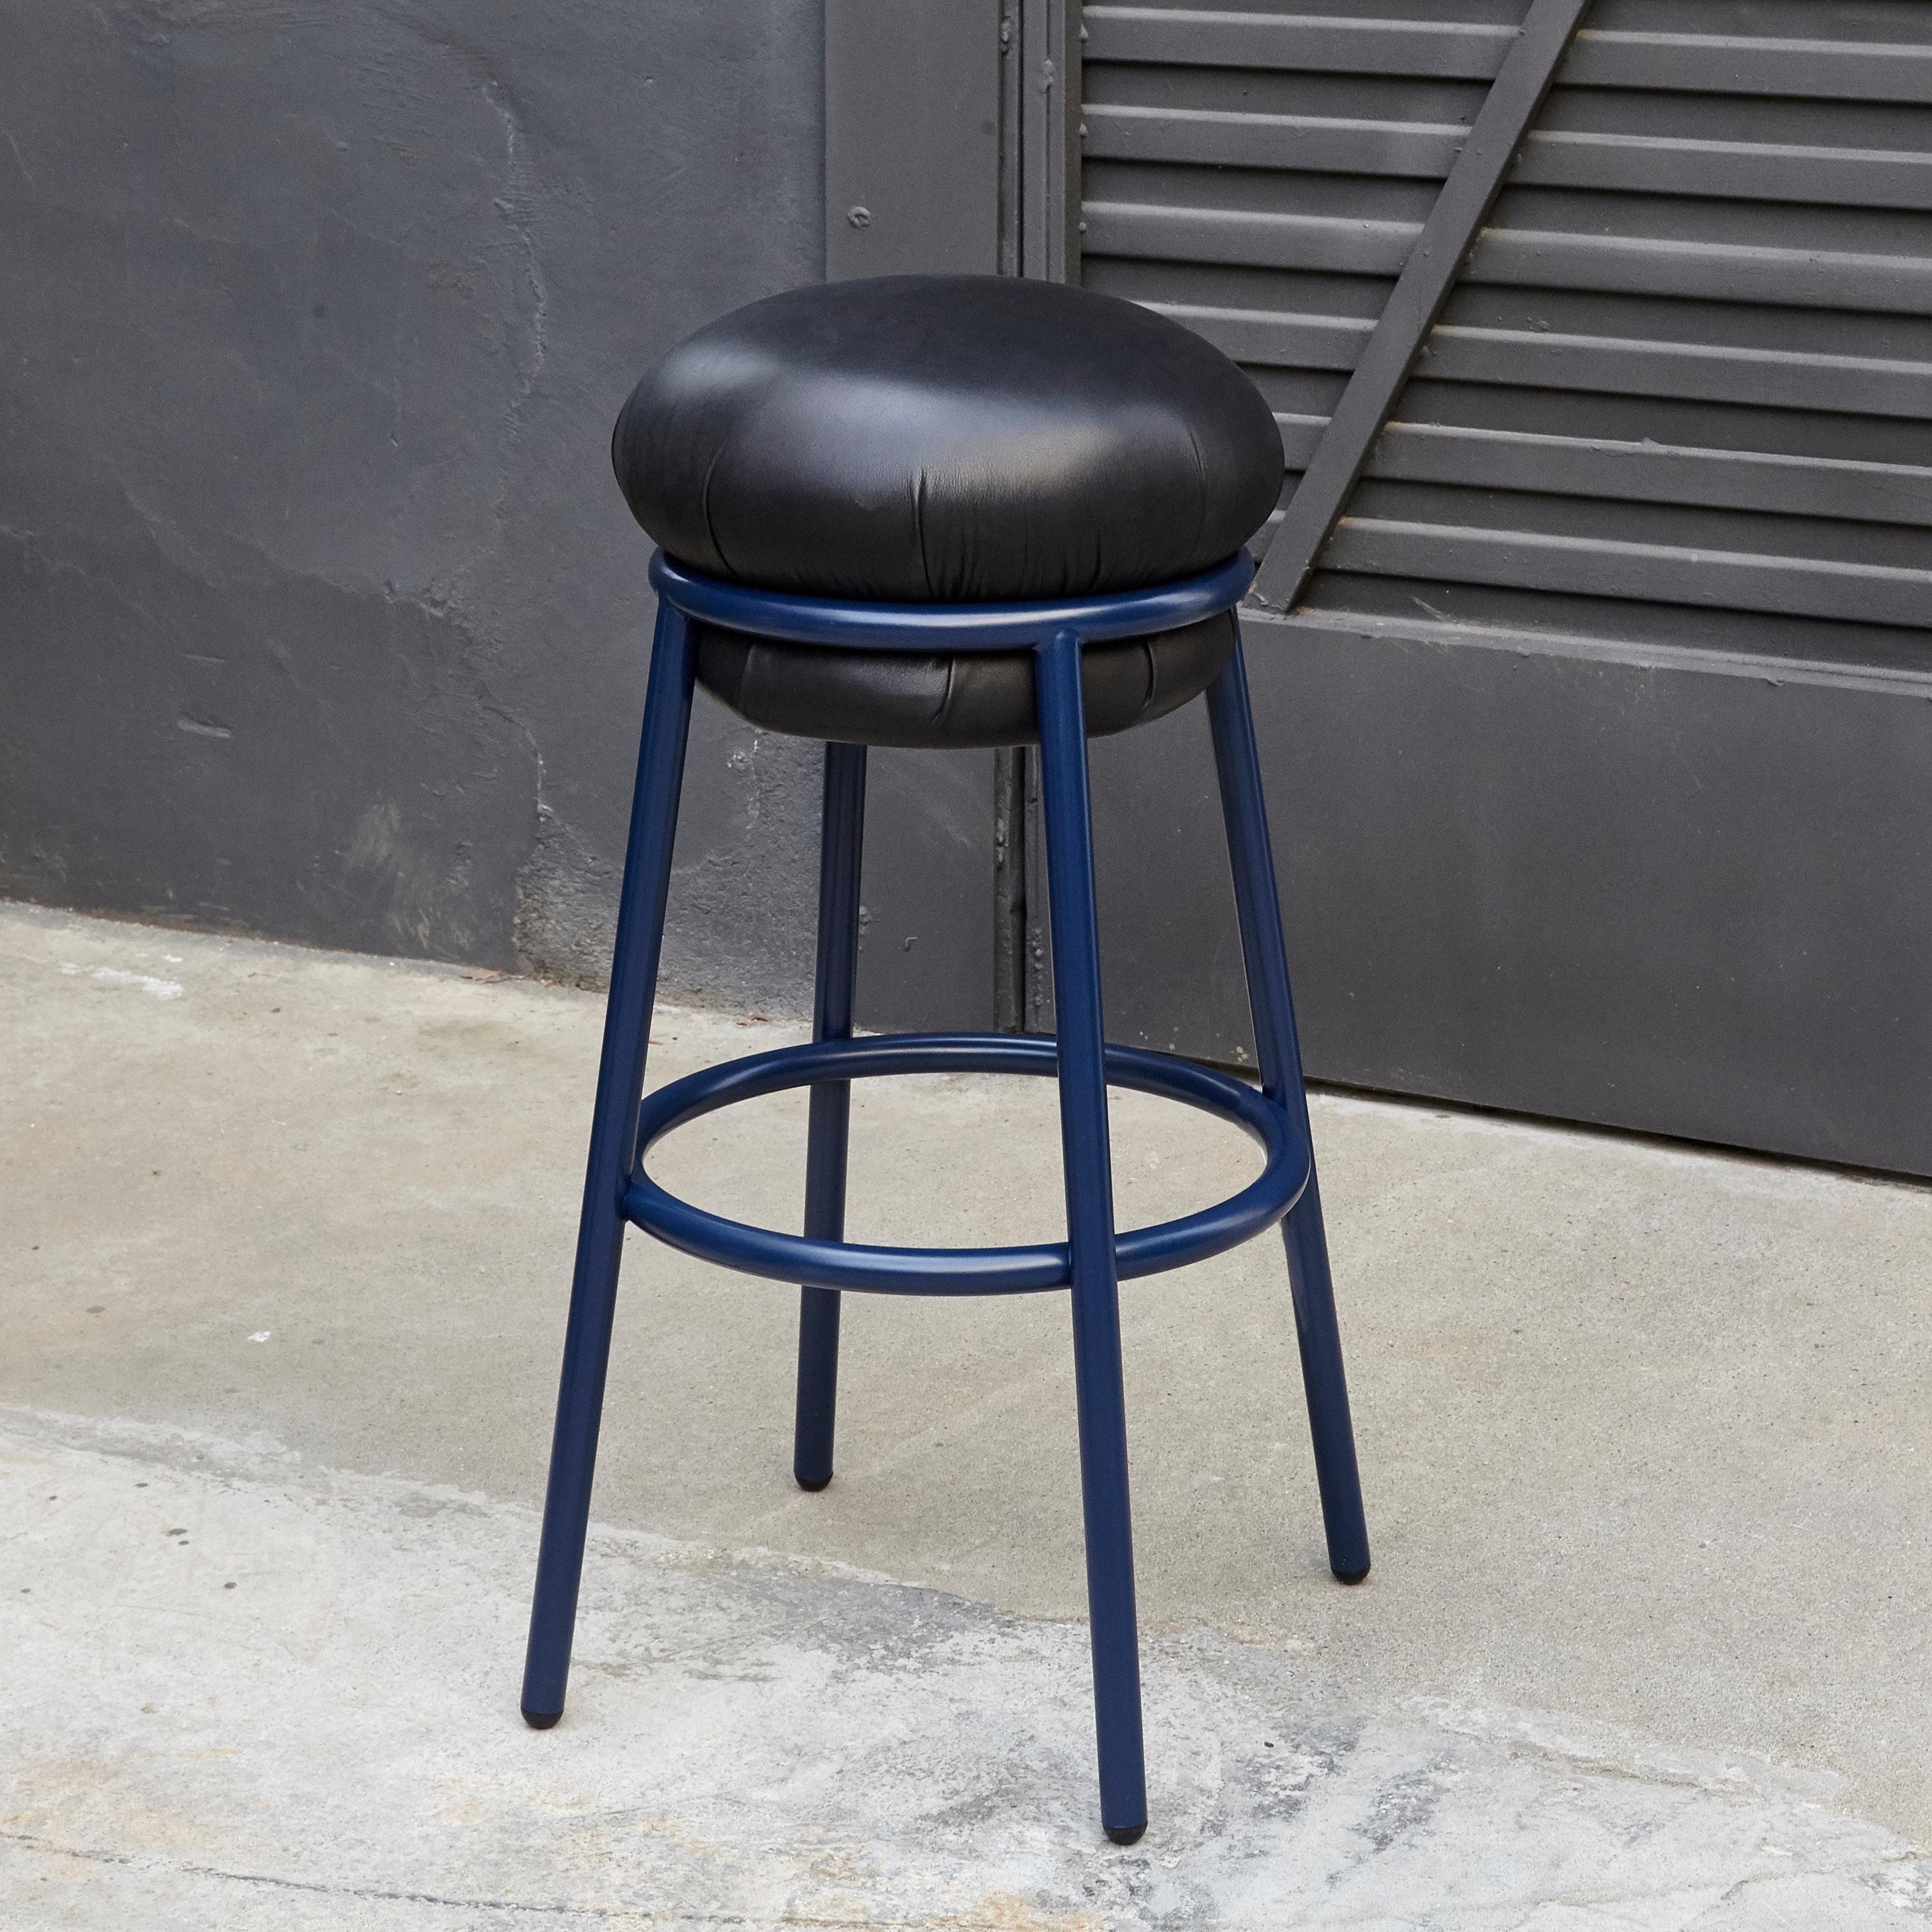 Stool designed by Stephen Burks.

Blue iron tubular (25mm) structured armchair. Seat upholstered in blue leather with blue structure.

The leather upholstery oozes over the bare iron structure. 

Measure: Ø 36 x H 80 cm

Year: 2018.

In good